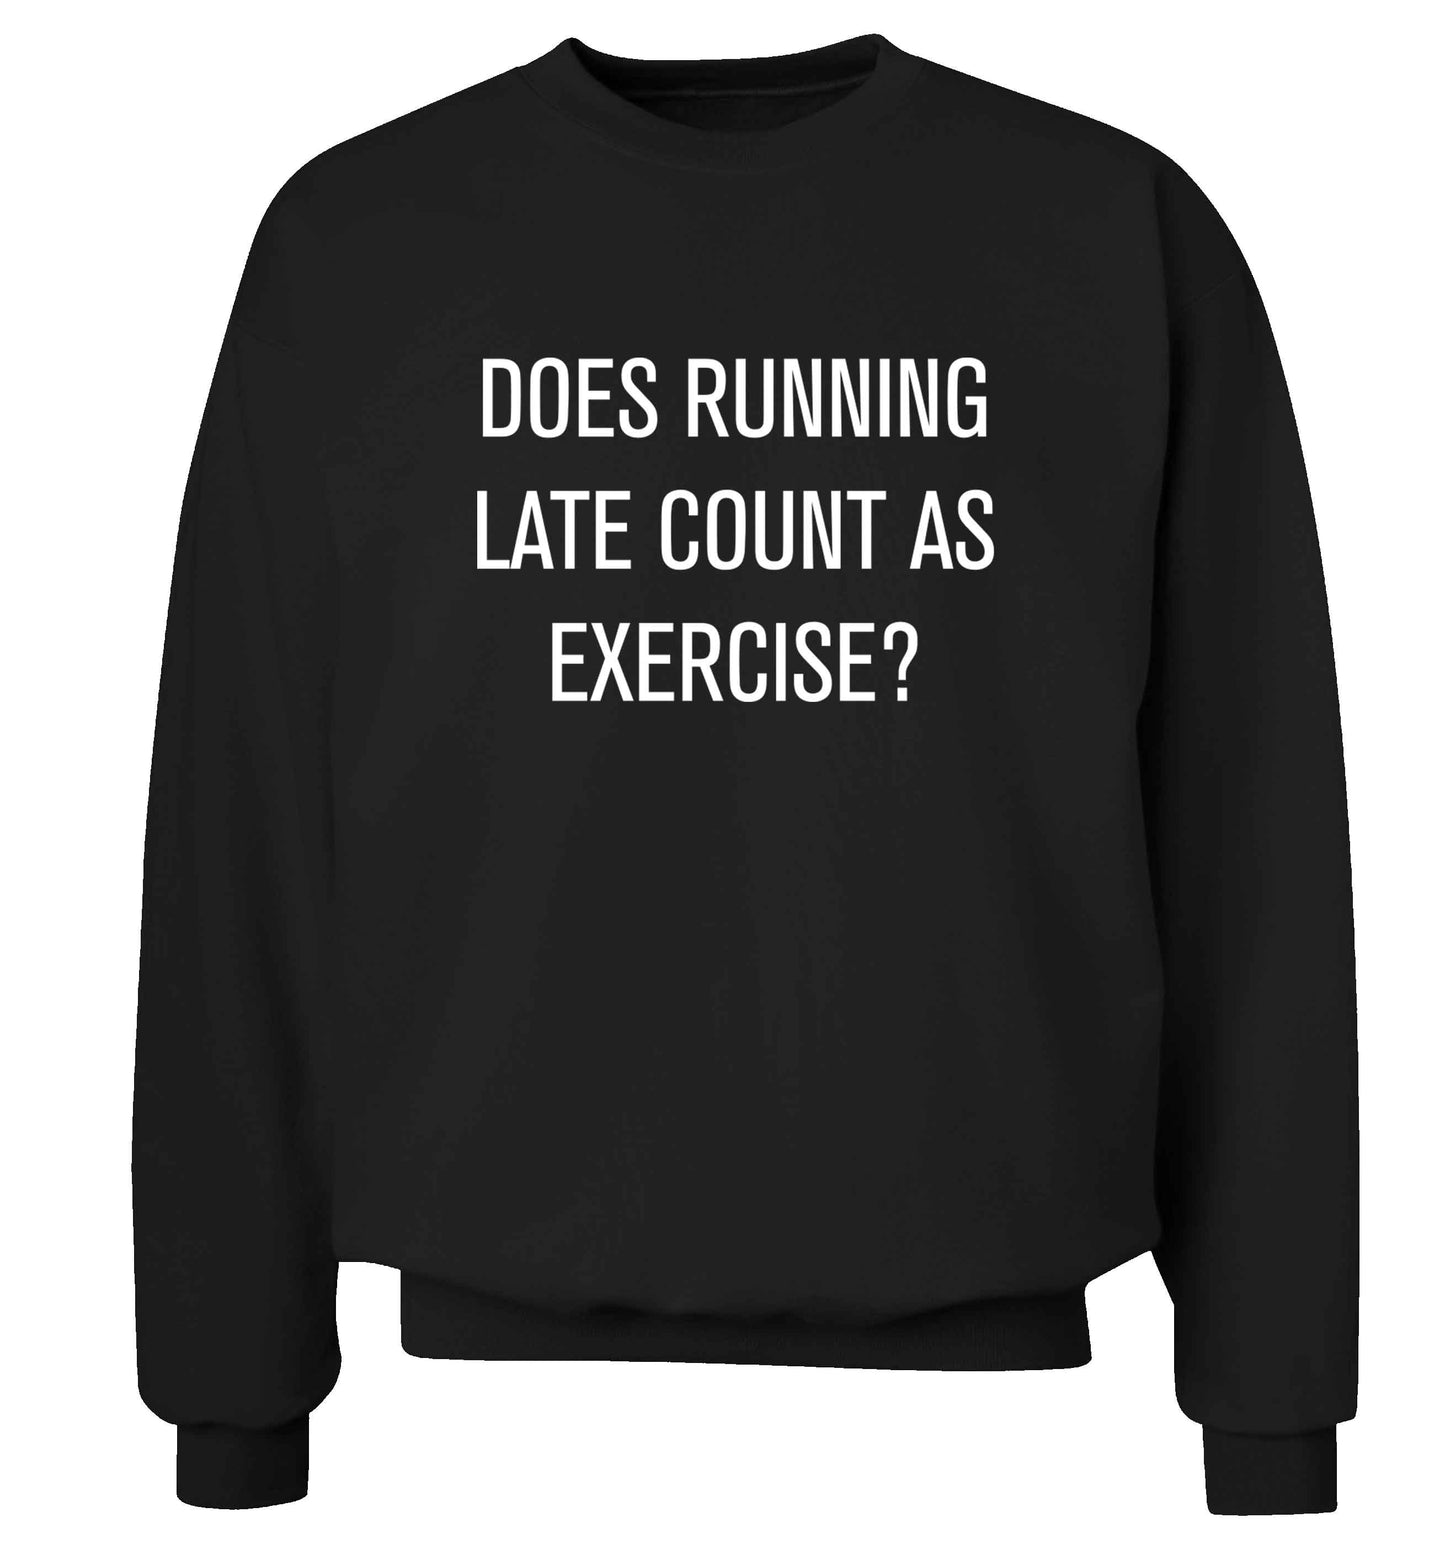 Does running late count as exercise? adult's unisex black sweater 2XL